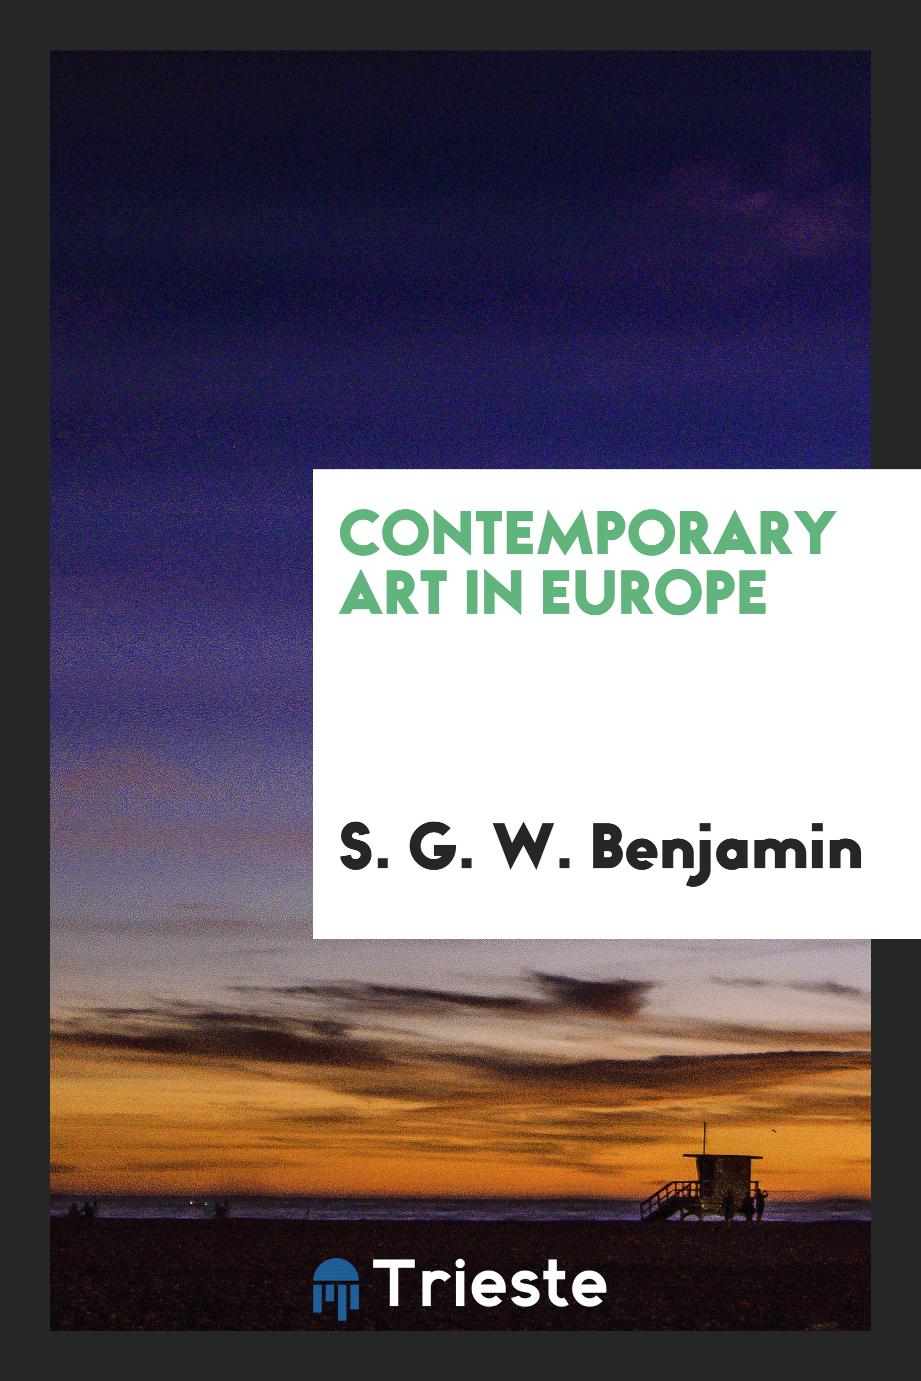 Contemporary art in Europe